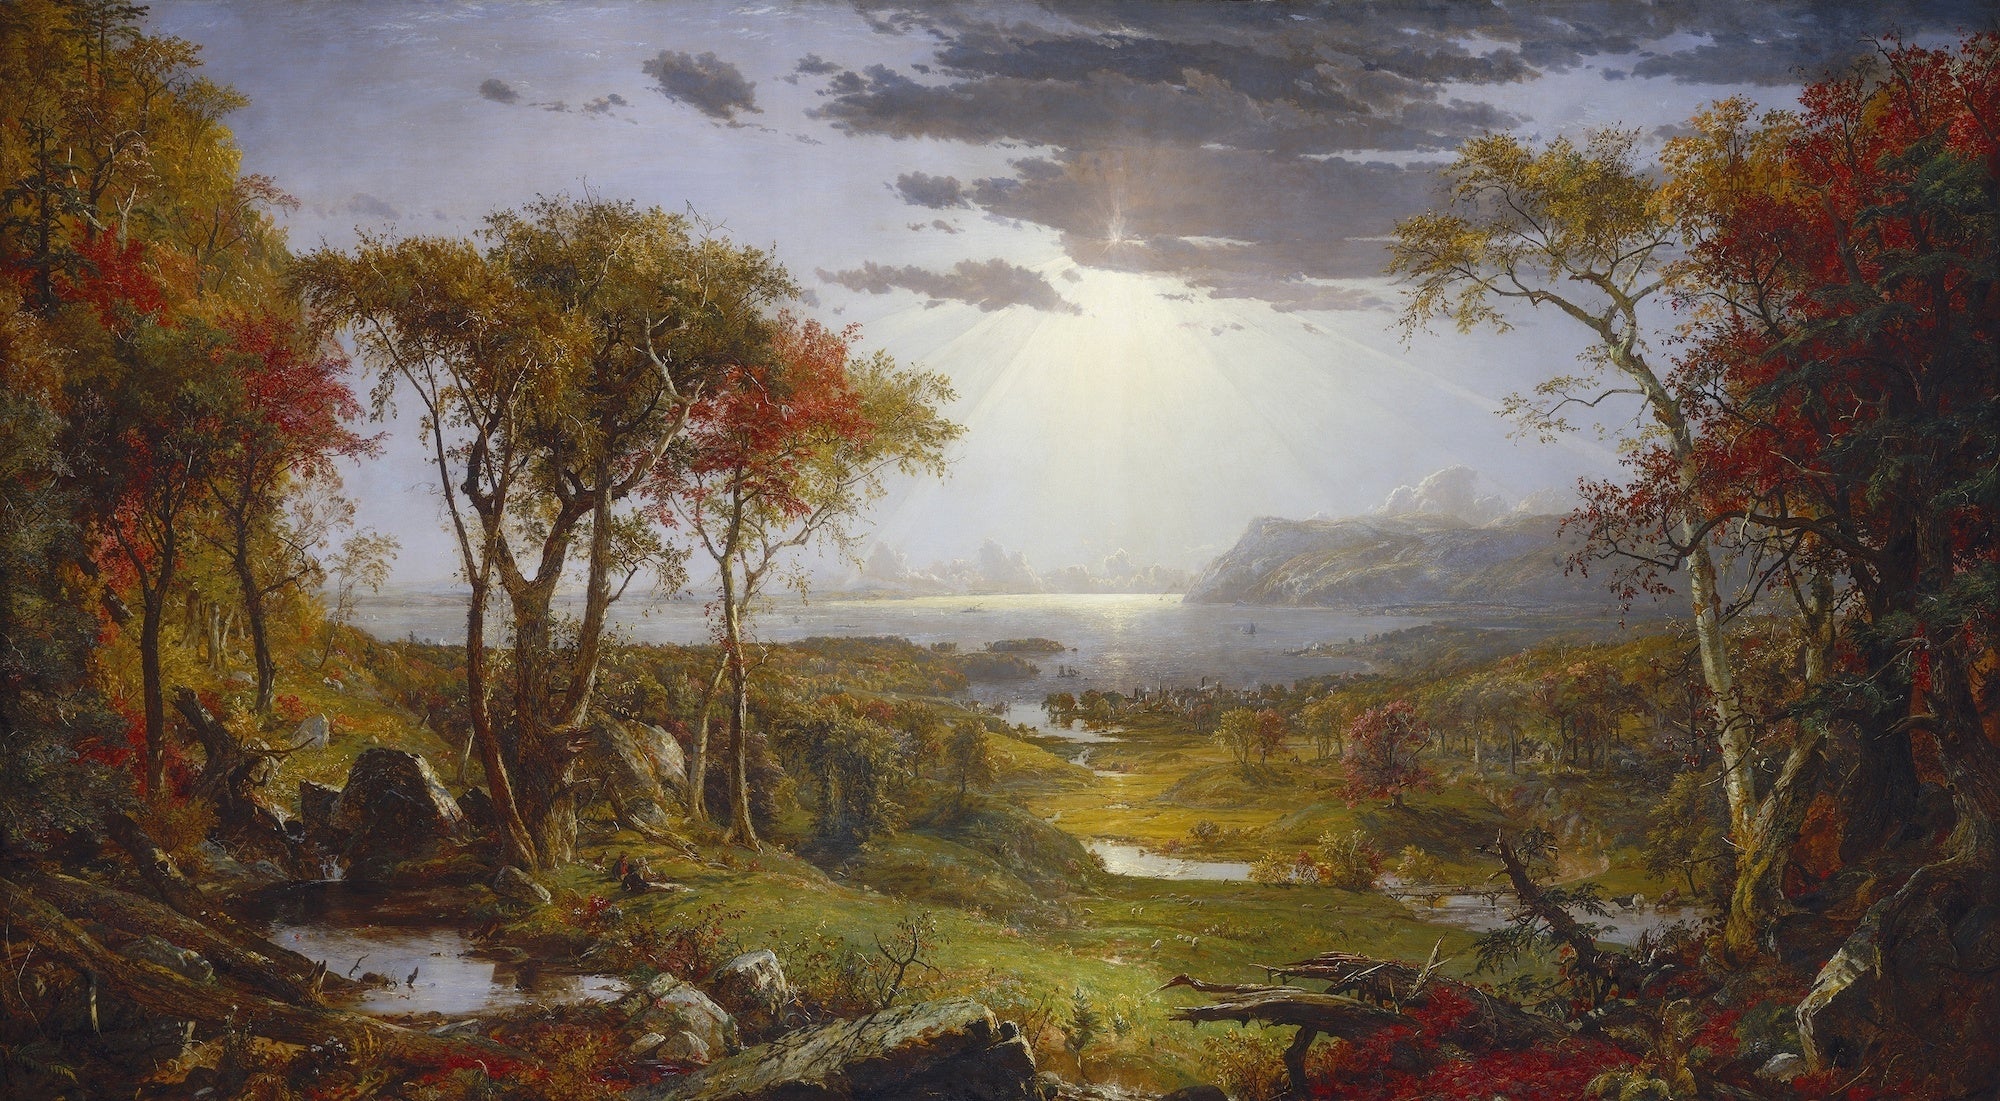 Autumn-On the Hudson River, Jasper Francis Cropsey, 1860, American painting, oil on canvas. The view is toward the southeast and includes Storm King. Cropsey painted the large canvas in his London studio